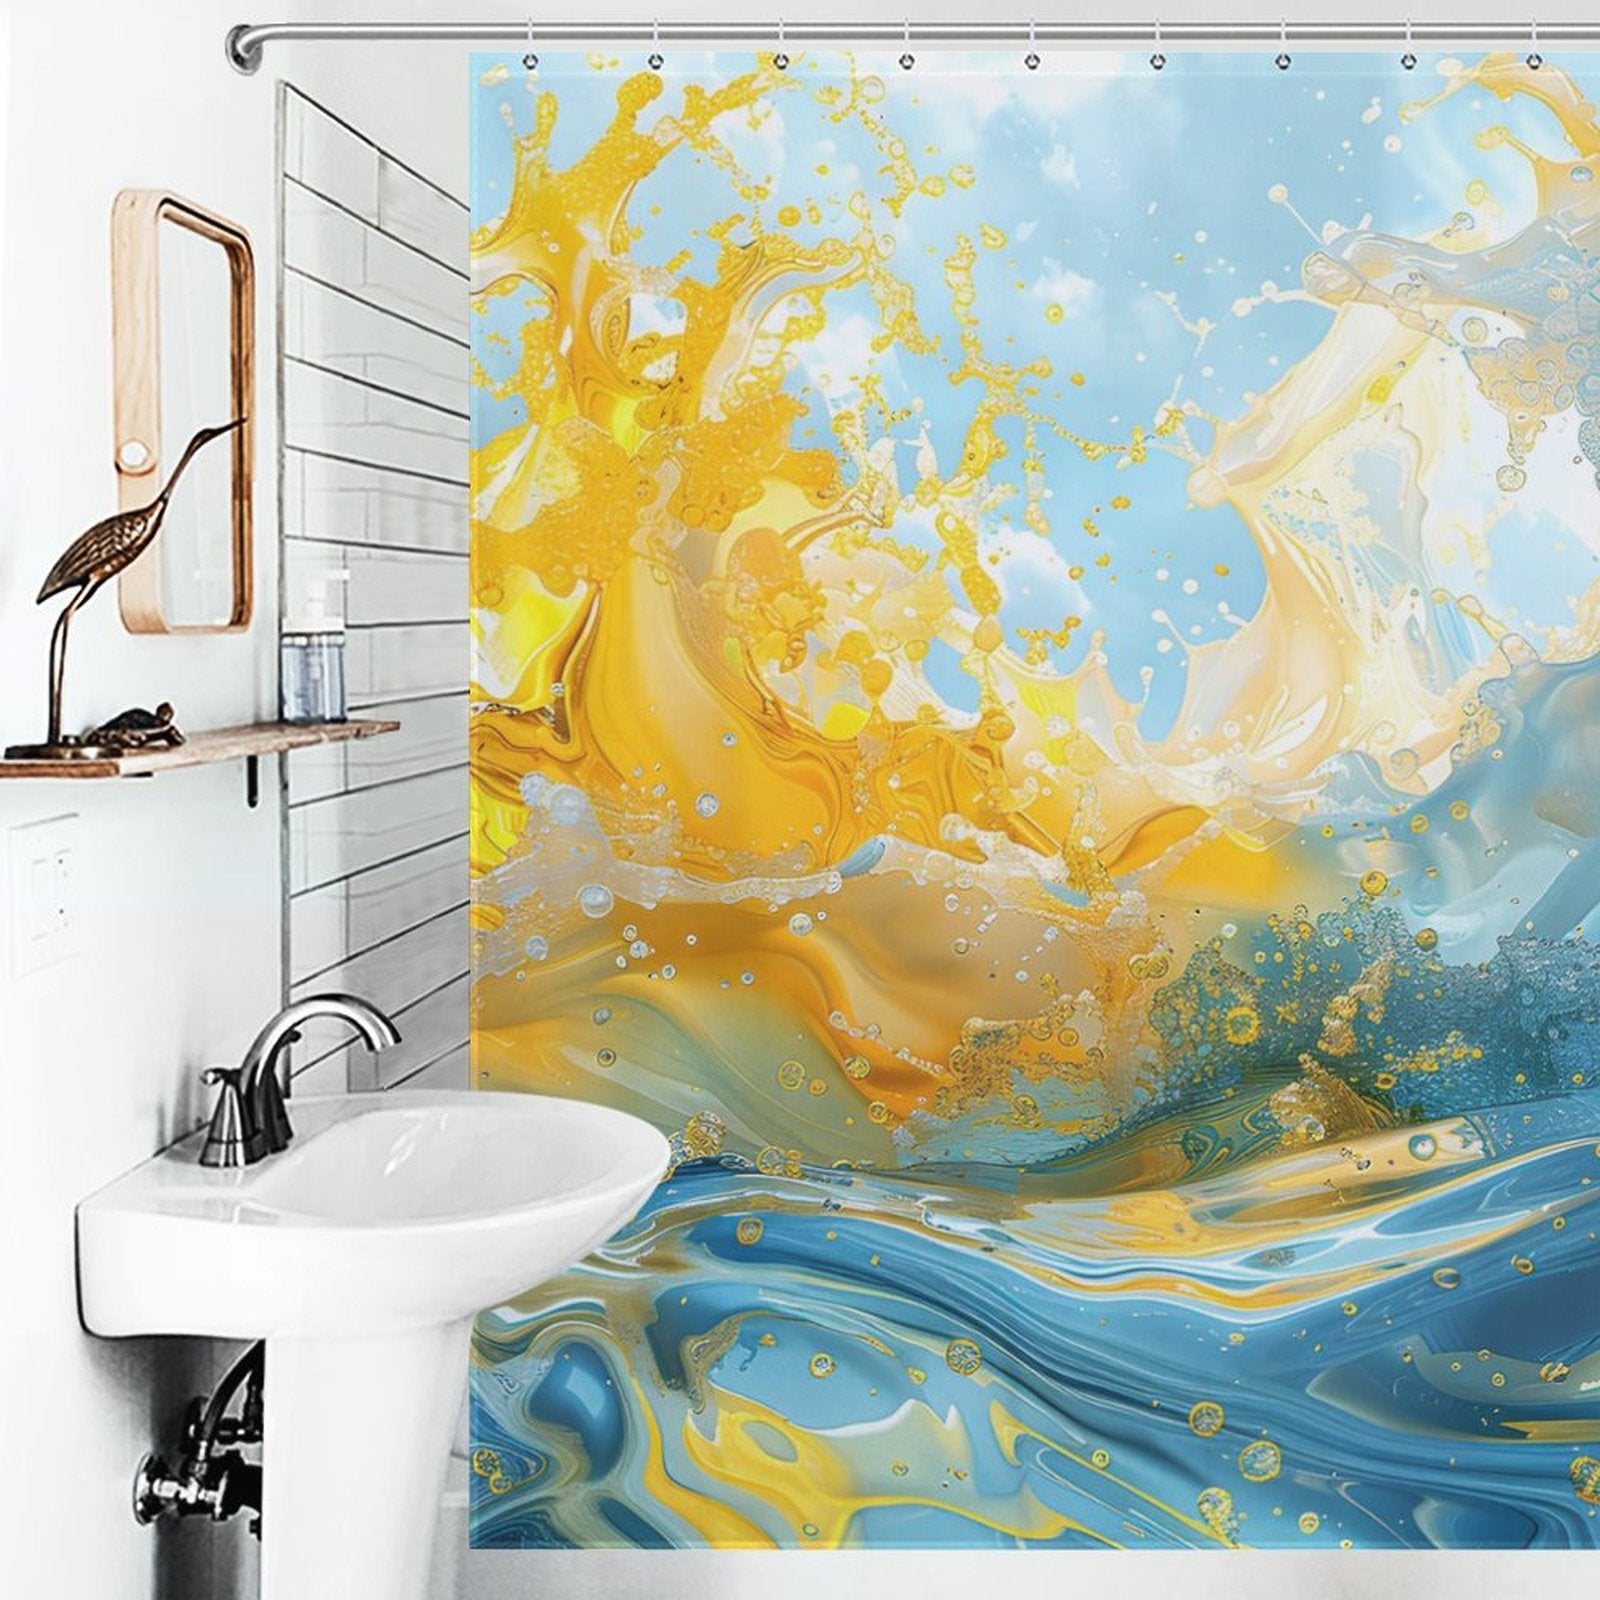 Bathroom with a curved white sink, a wall-mounted mirror, and an Abstract Yellow and Blue Wave Ocean Watercolor Shower Curtain-Cottoncat by Cotton Cat that features an abstract yellow and blue wave for a touch of vibrant bathroom decor.